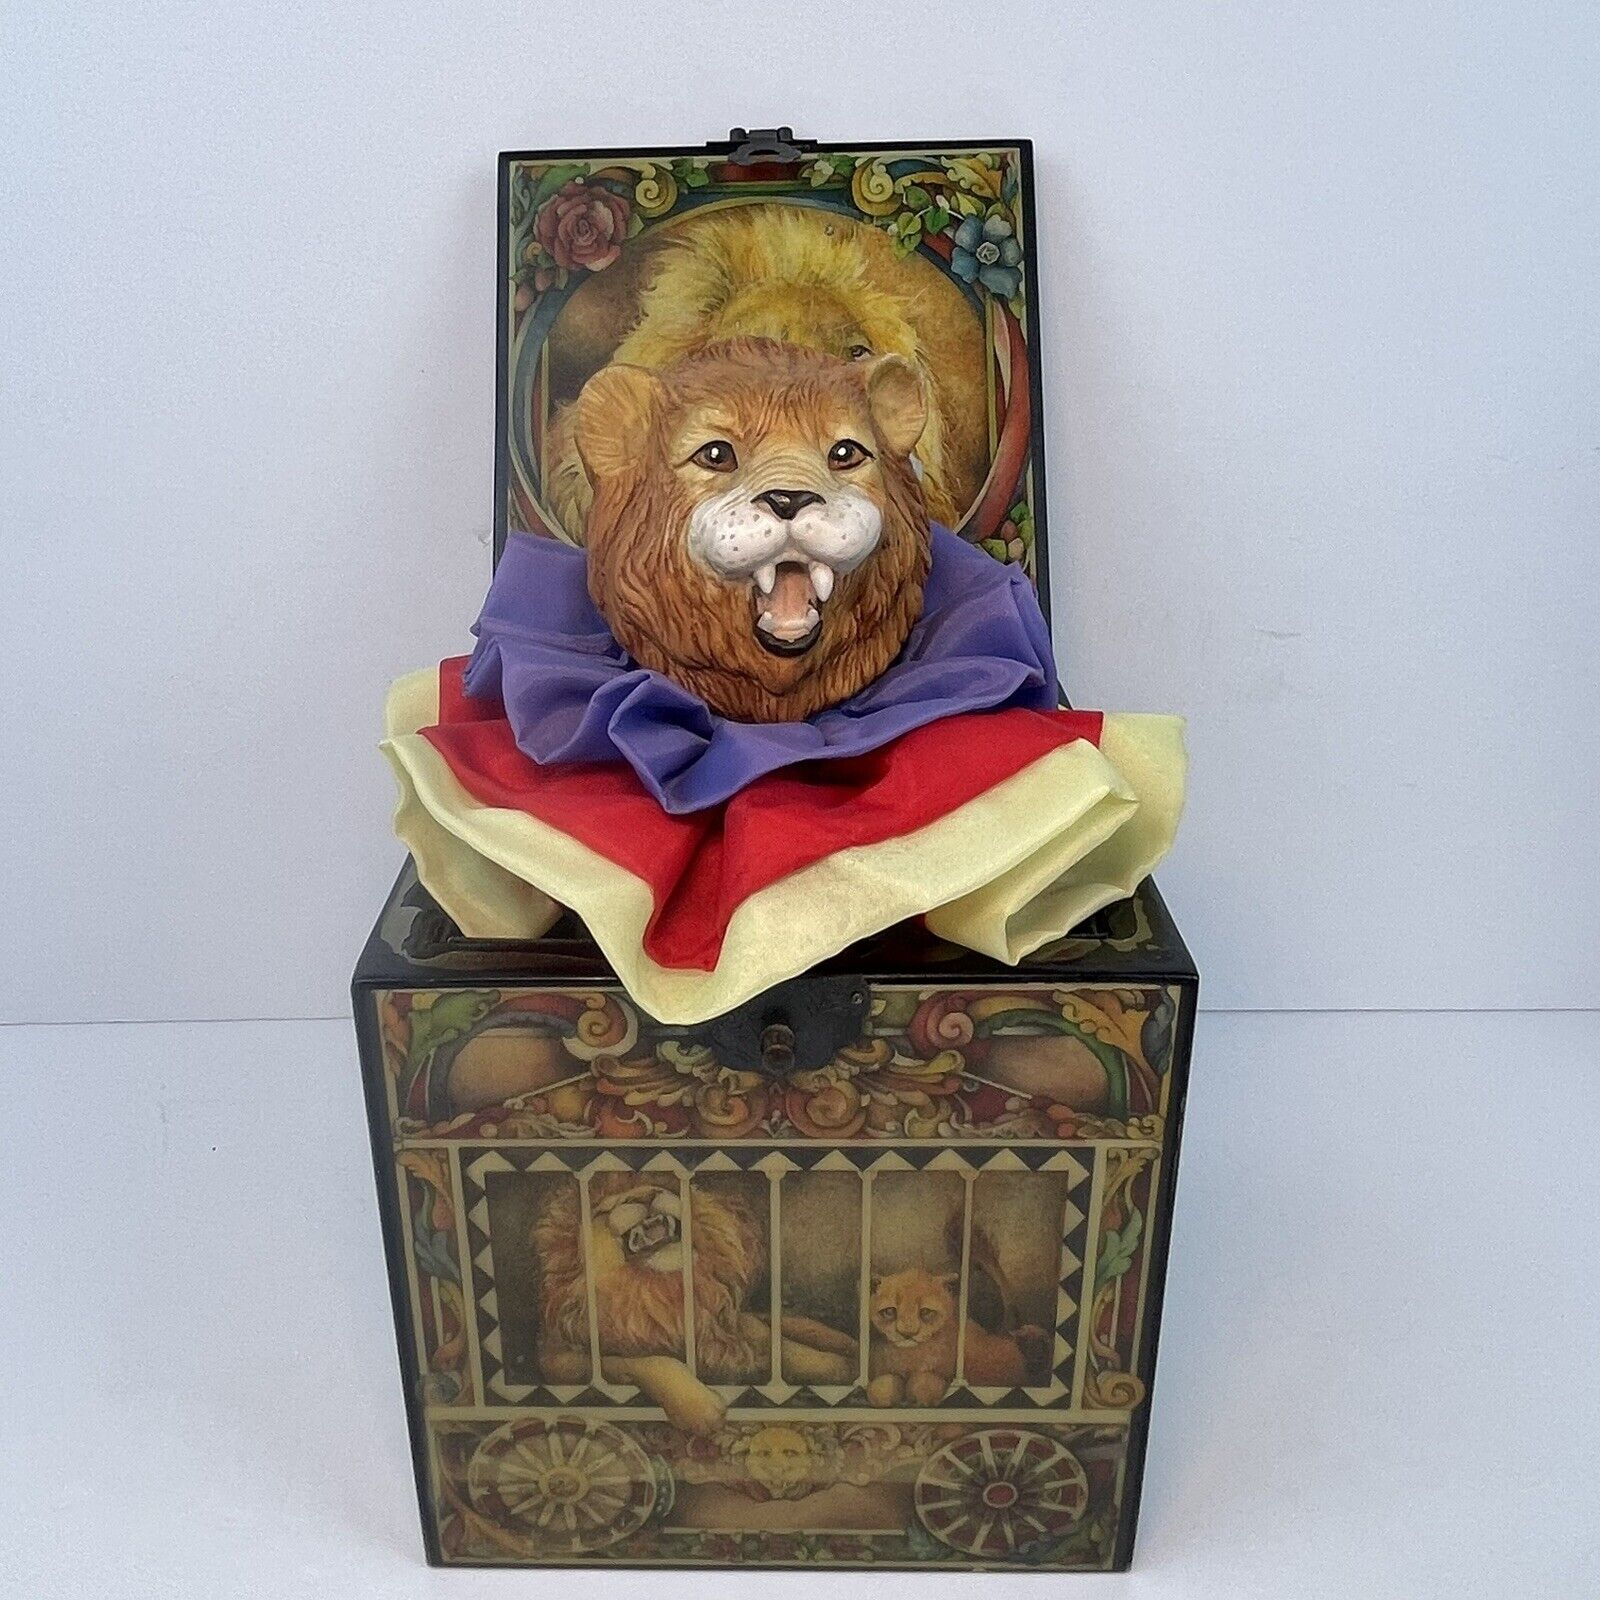 Limited Edition Musical (lion) Jack in the Box - Monarch of the Midway Festivale